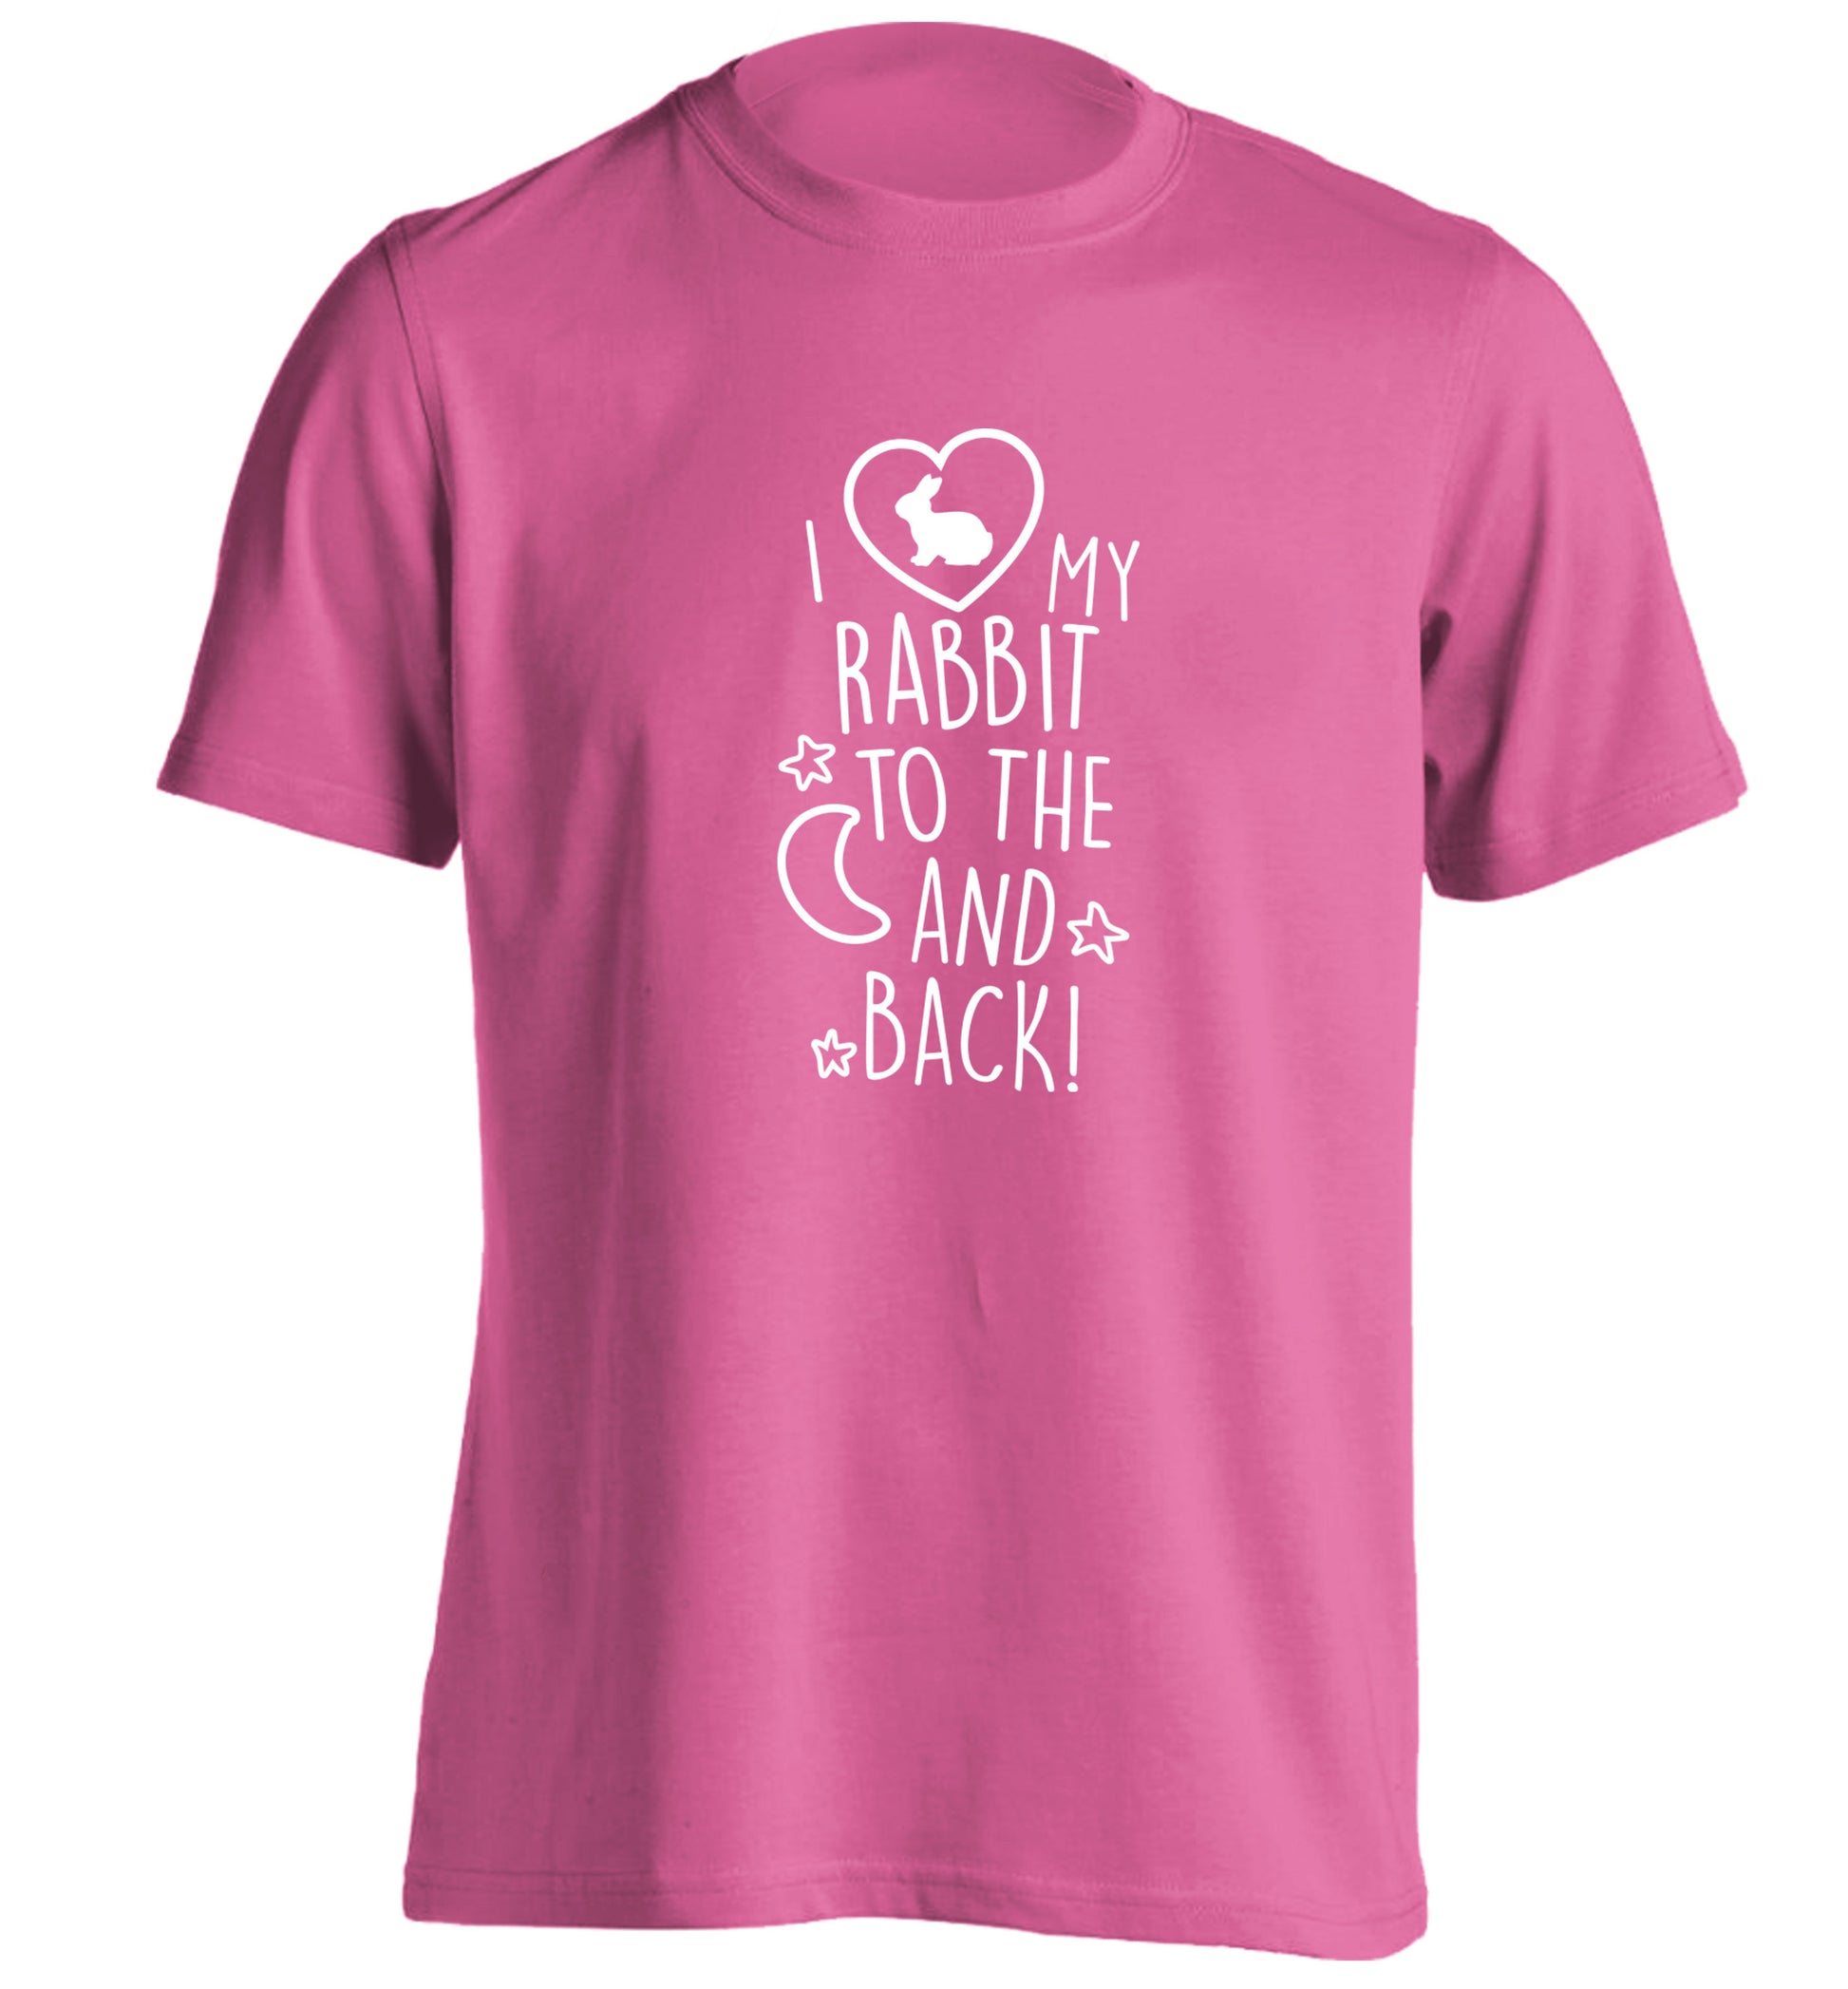 I love my rabbit to the moon and back adults unisex pink Tshirt 2XL